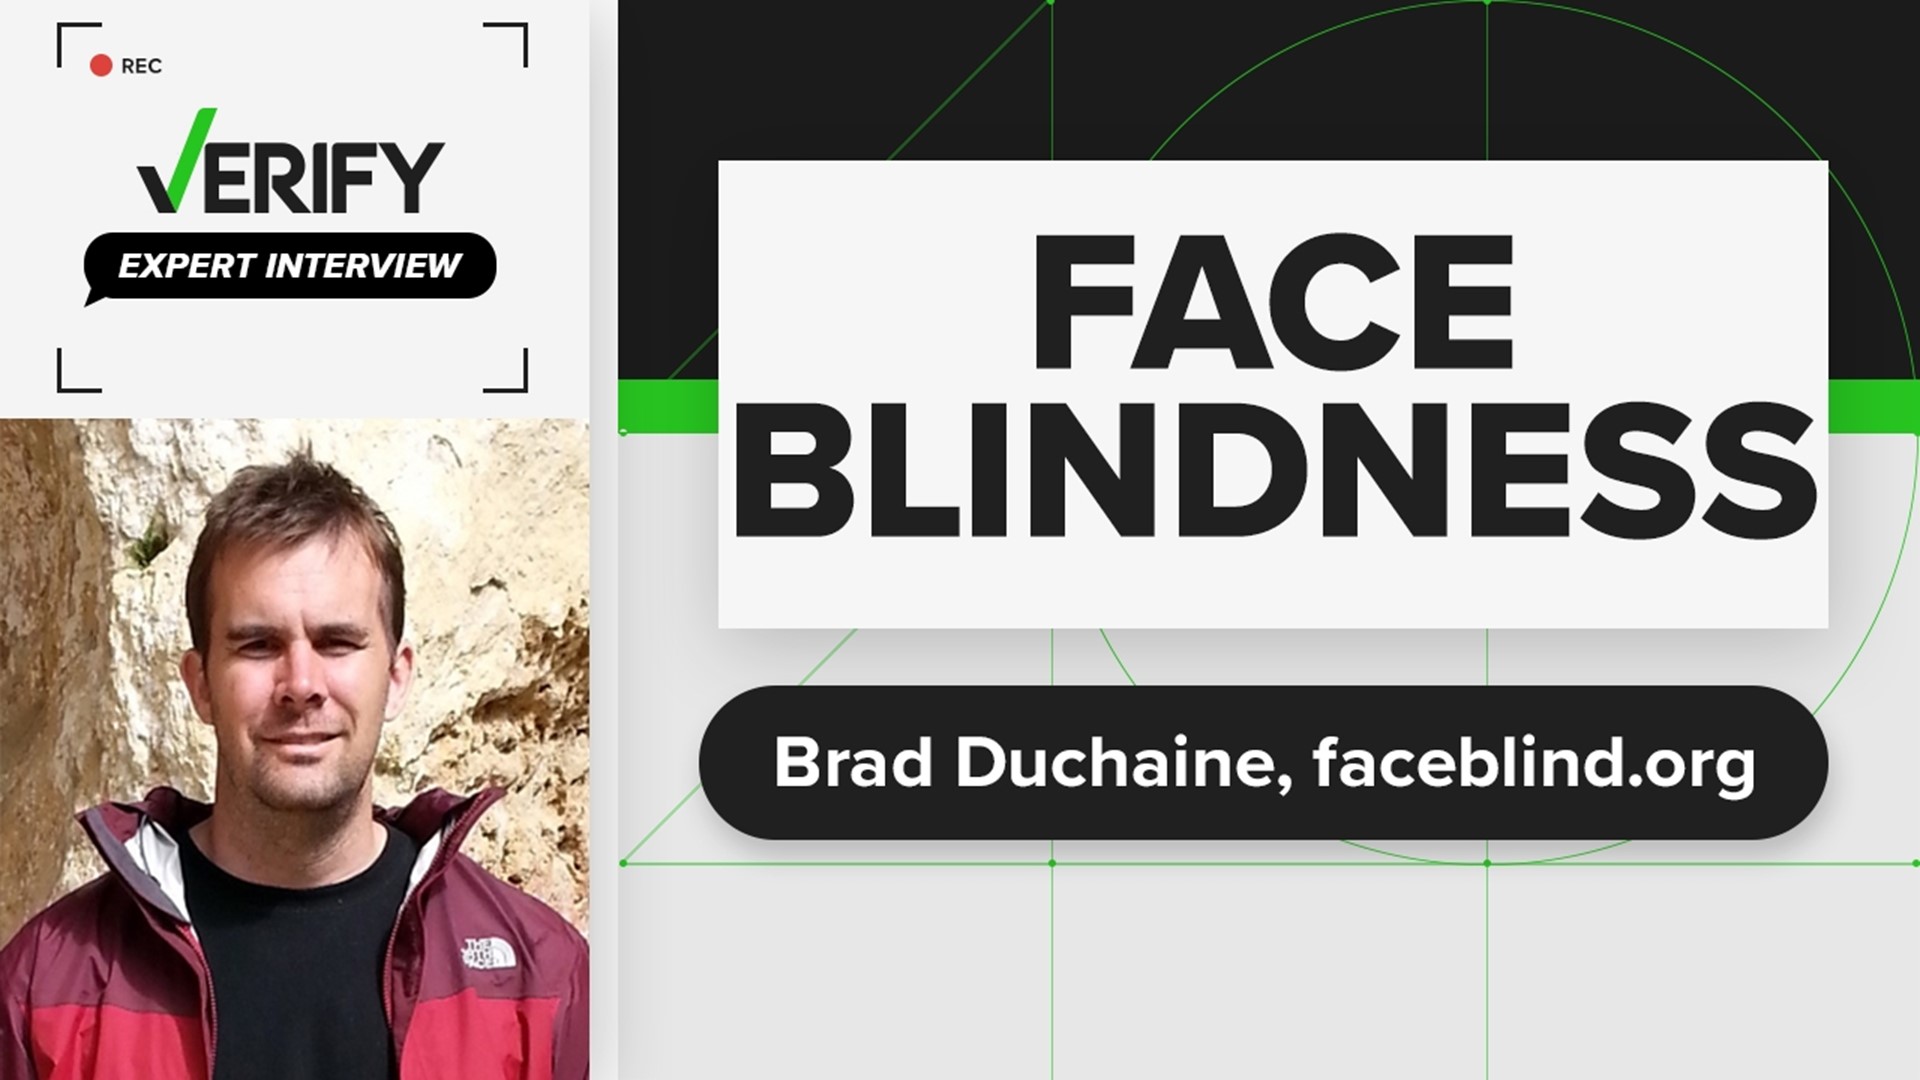 Brad Duchaine is a professor of psychological and brain sciences at Dartmouth College and co-founder of faceblind.org.